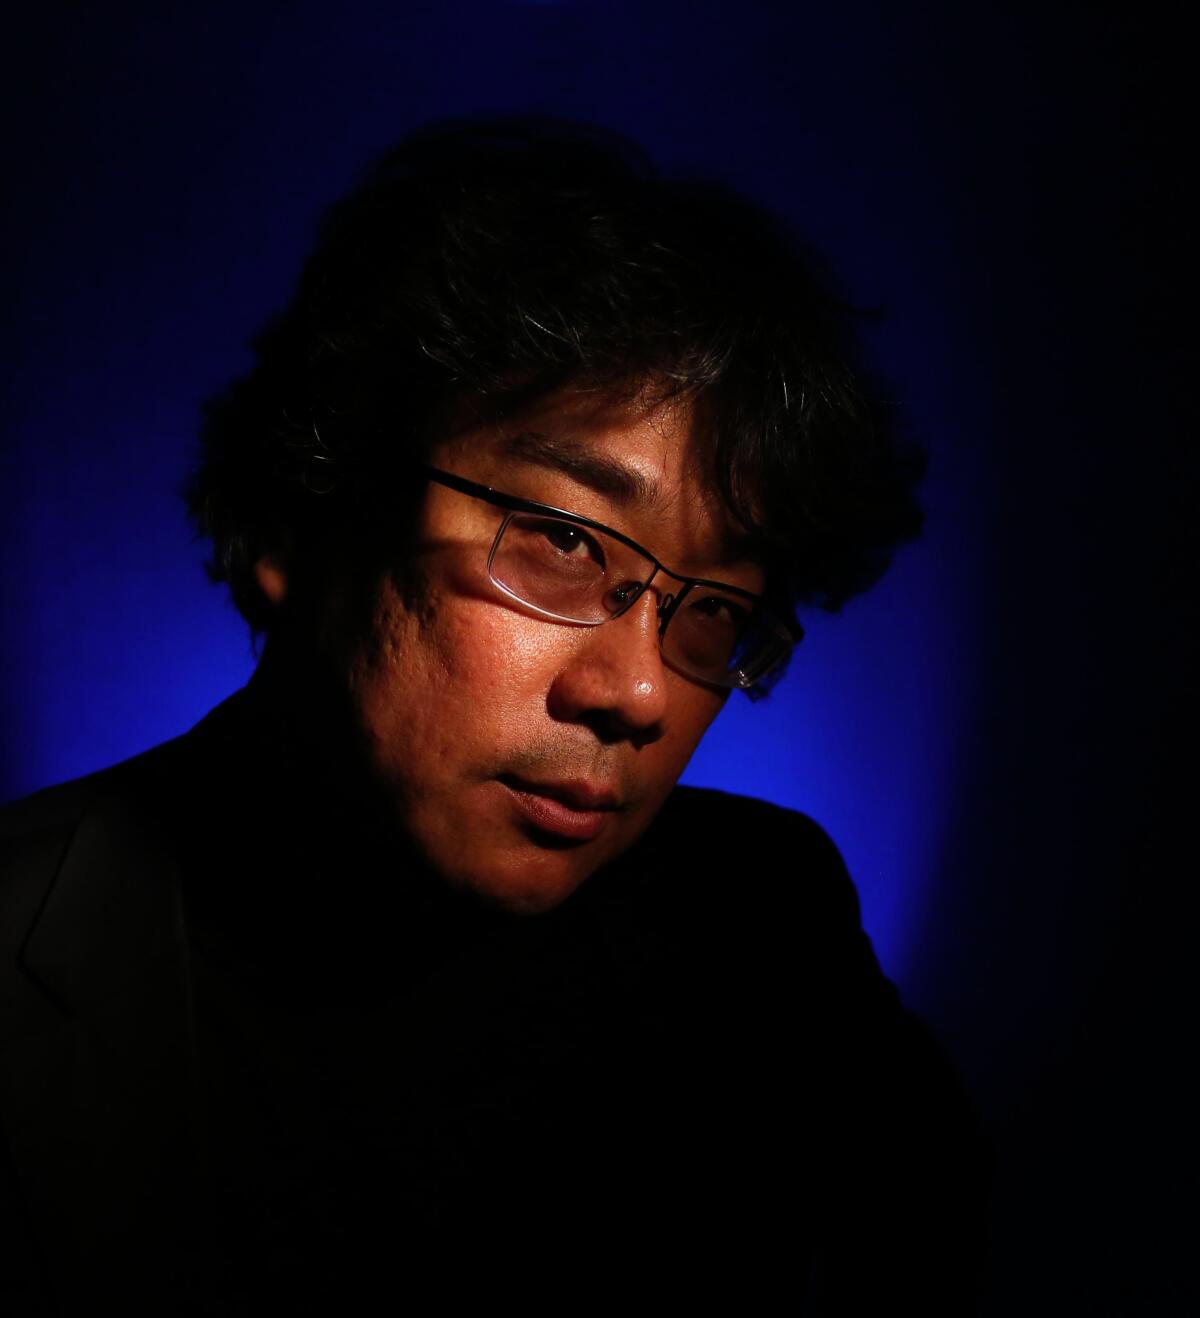 "Parasite" filmmaker Bong Joon Ho received Golden Globe nominations for writing and directing the film.